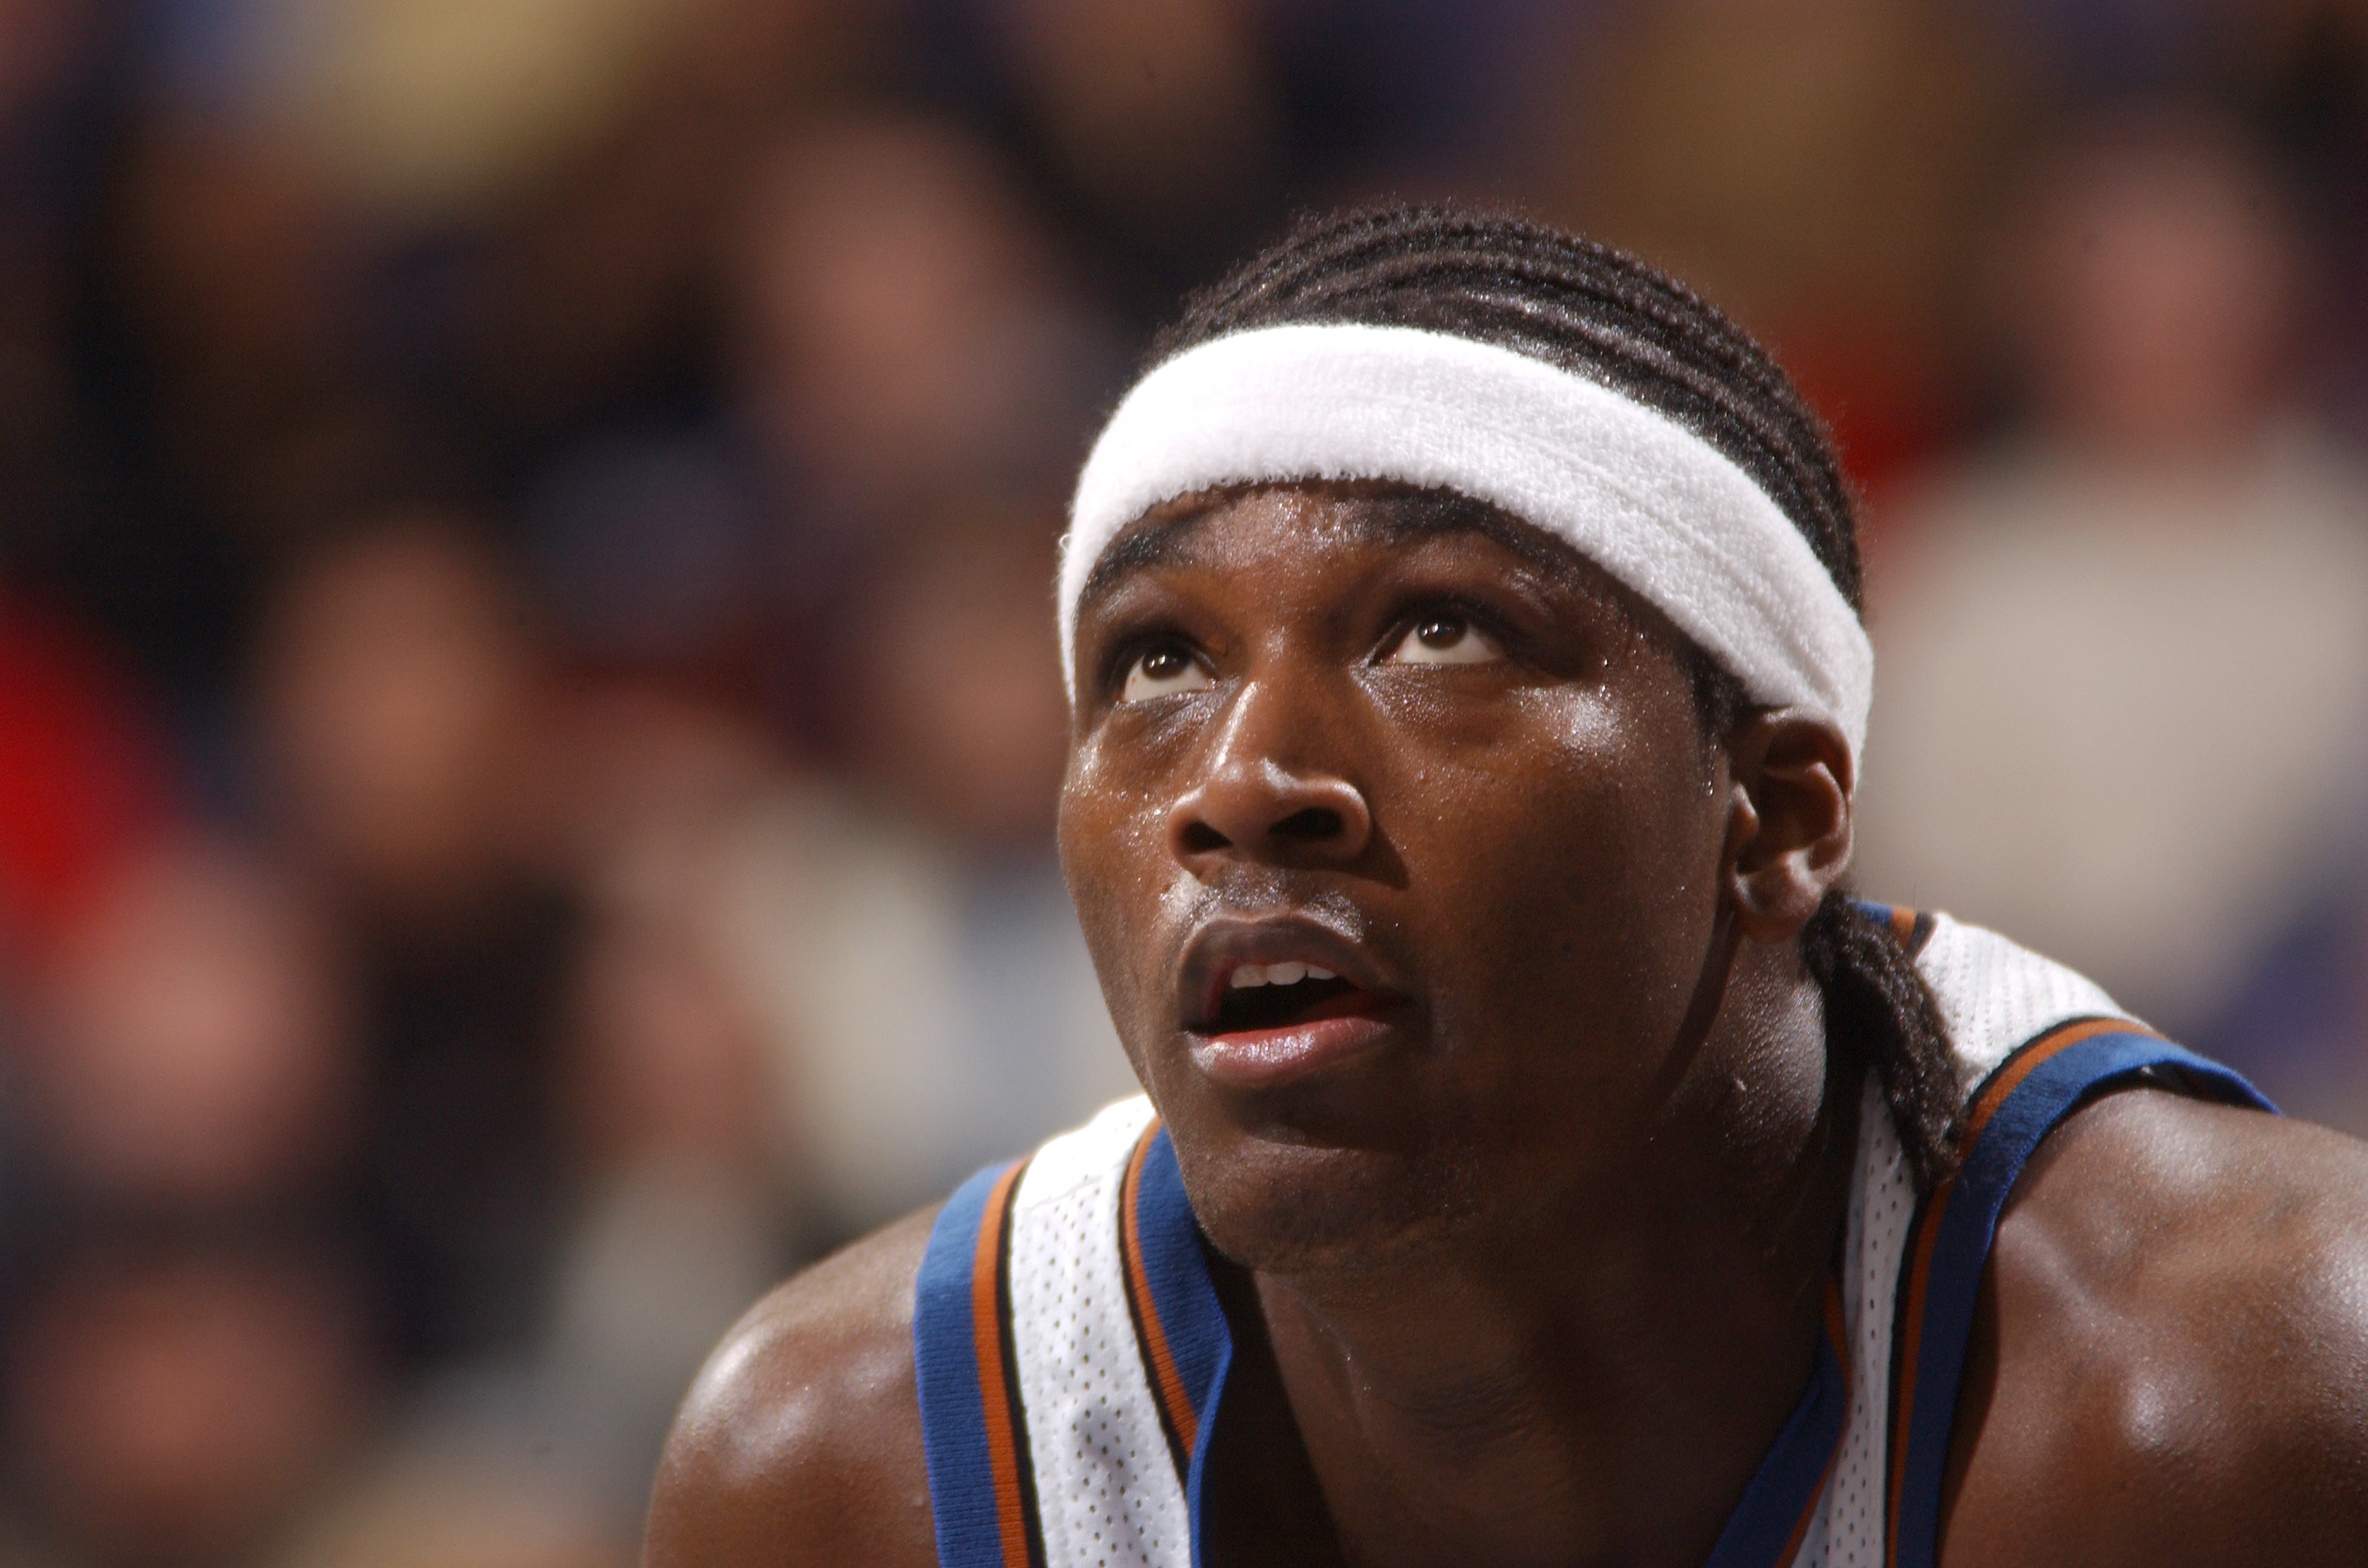 Kwame Brown slams Gilbert Arenas over 'All the Smoke' podcast comments